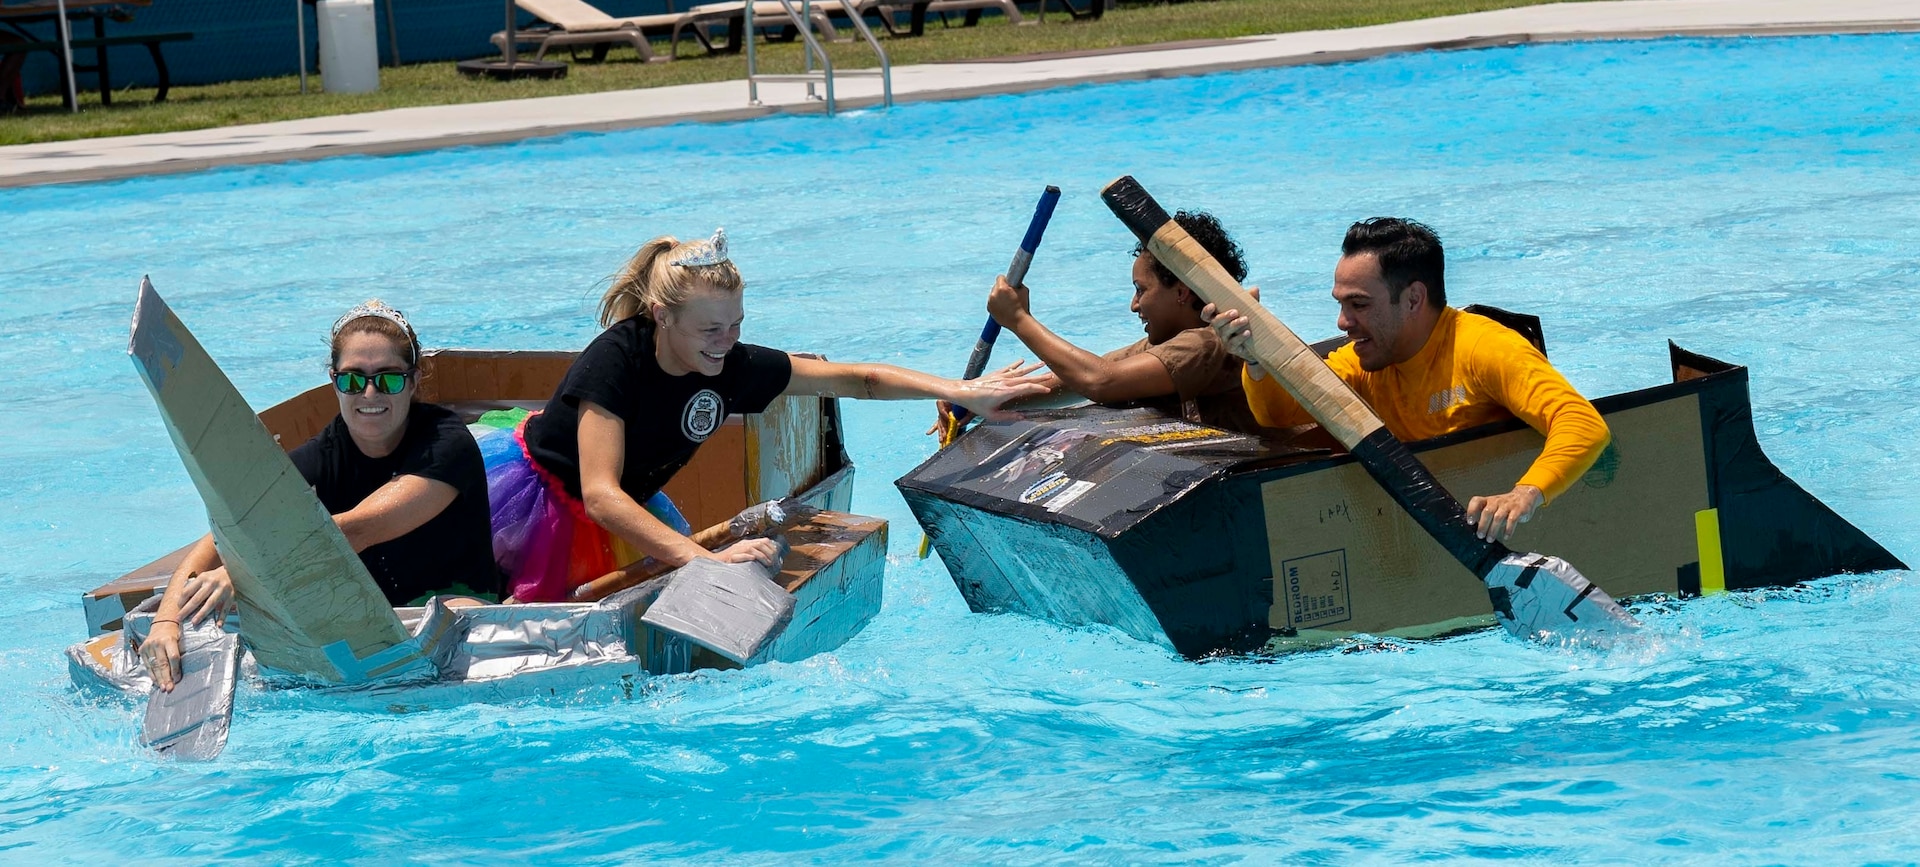 Sailors assigned to Navy Medicine Training Support Command, Defense Health Agency and Navy Medicine Education, Training and Logistics Command completed in a cardboard boat race as part of a Sailor 360 event at the Medicine Education Training Campus. The event was part of Sailor 360, a Navy initiative to develop innovative and creative command-developed leadership programs.